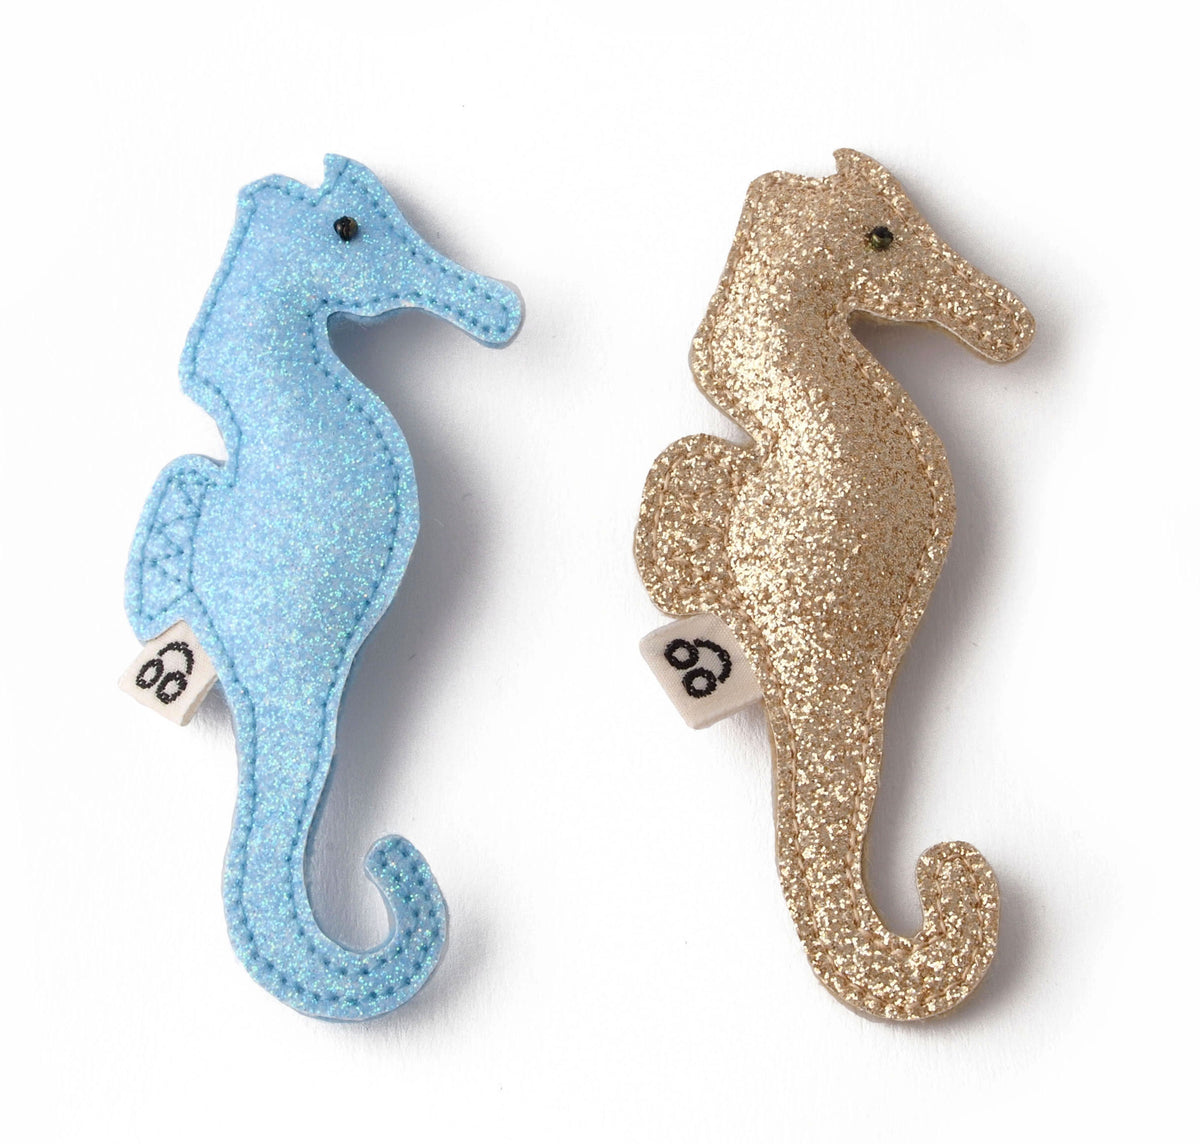 A fun hair clip in the shape of a seahorse for all the little beach goers.  Available in multiple color options.